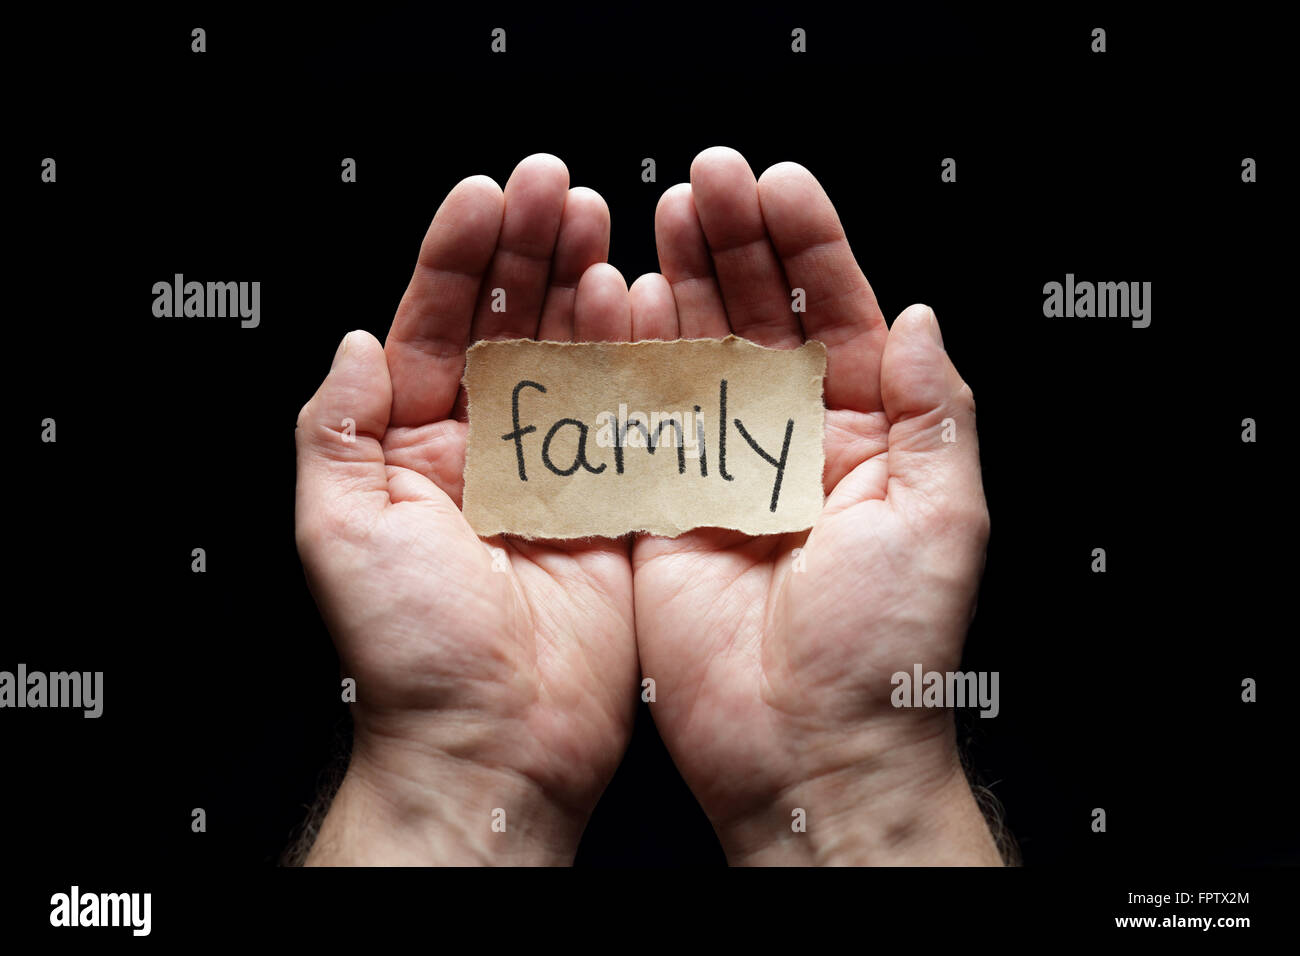 Family with the protection of cupped hands, concept for love, health, security and care Stock Photo